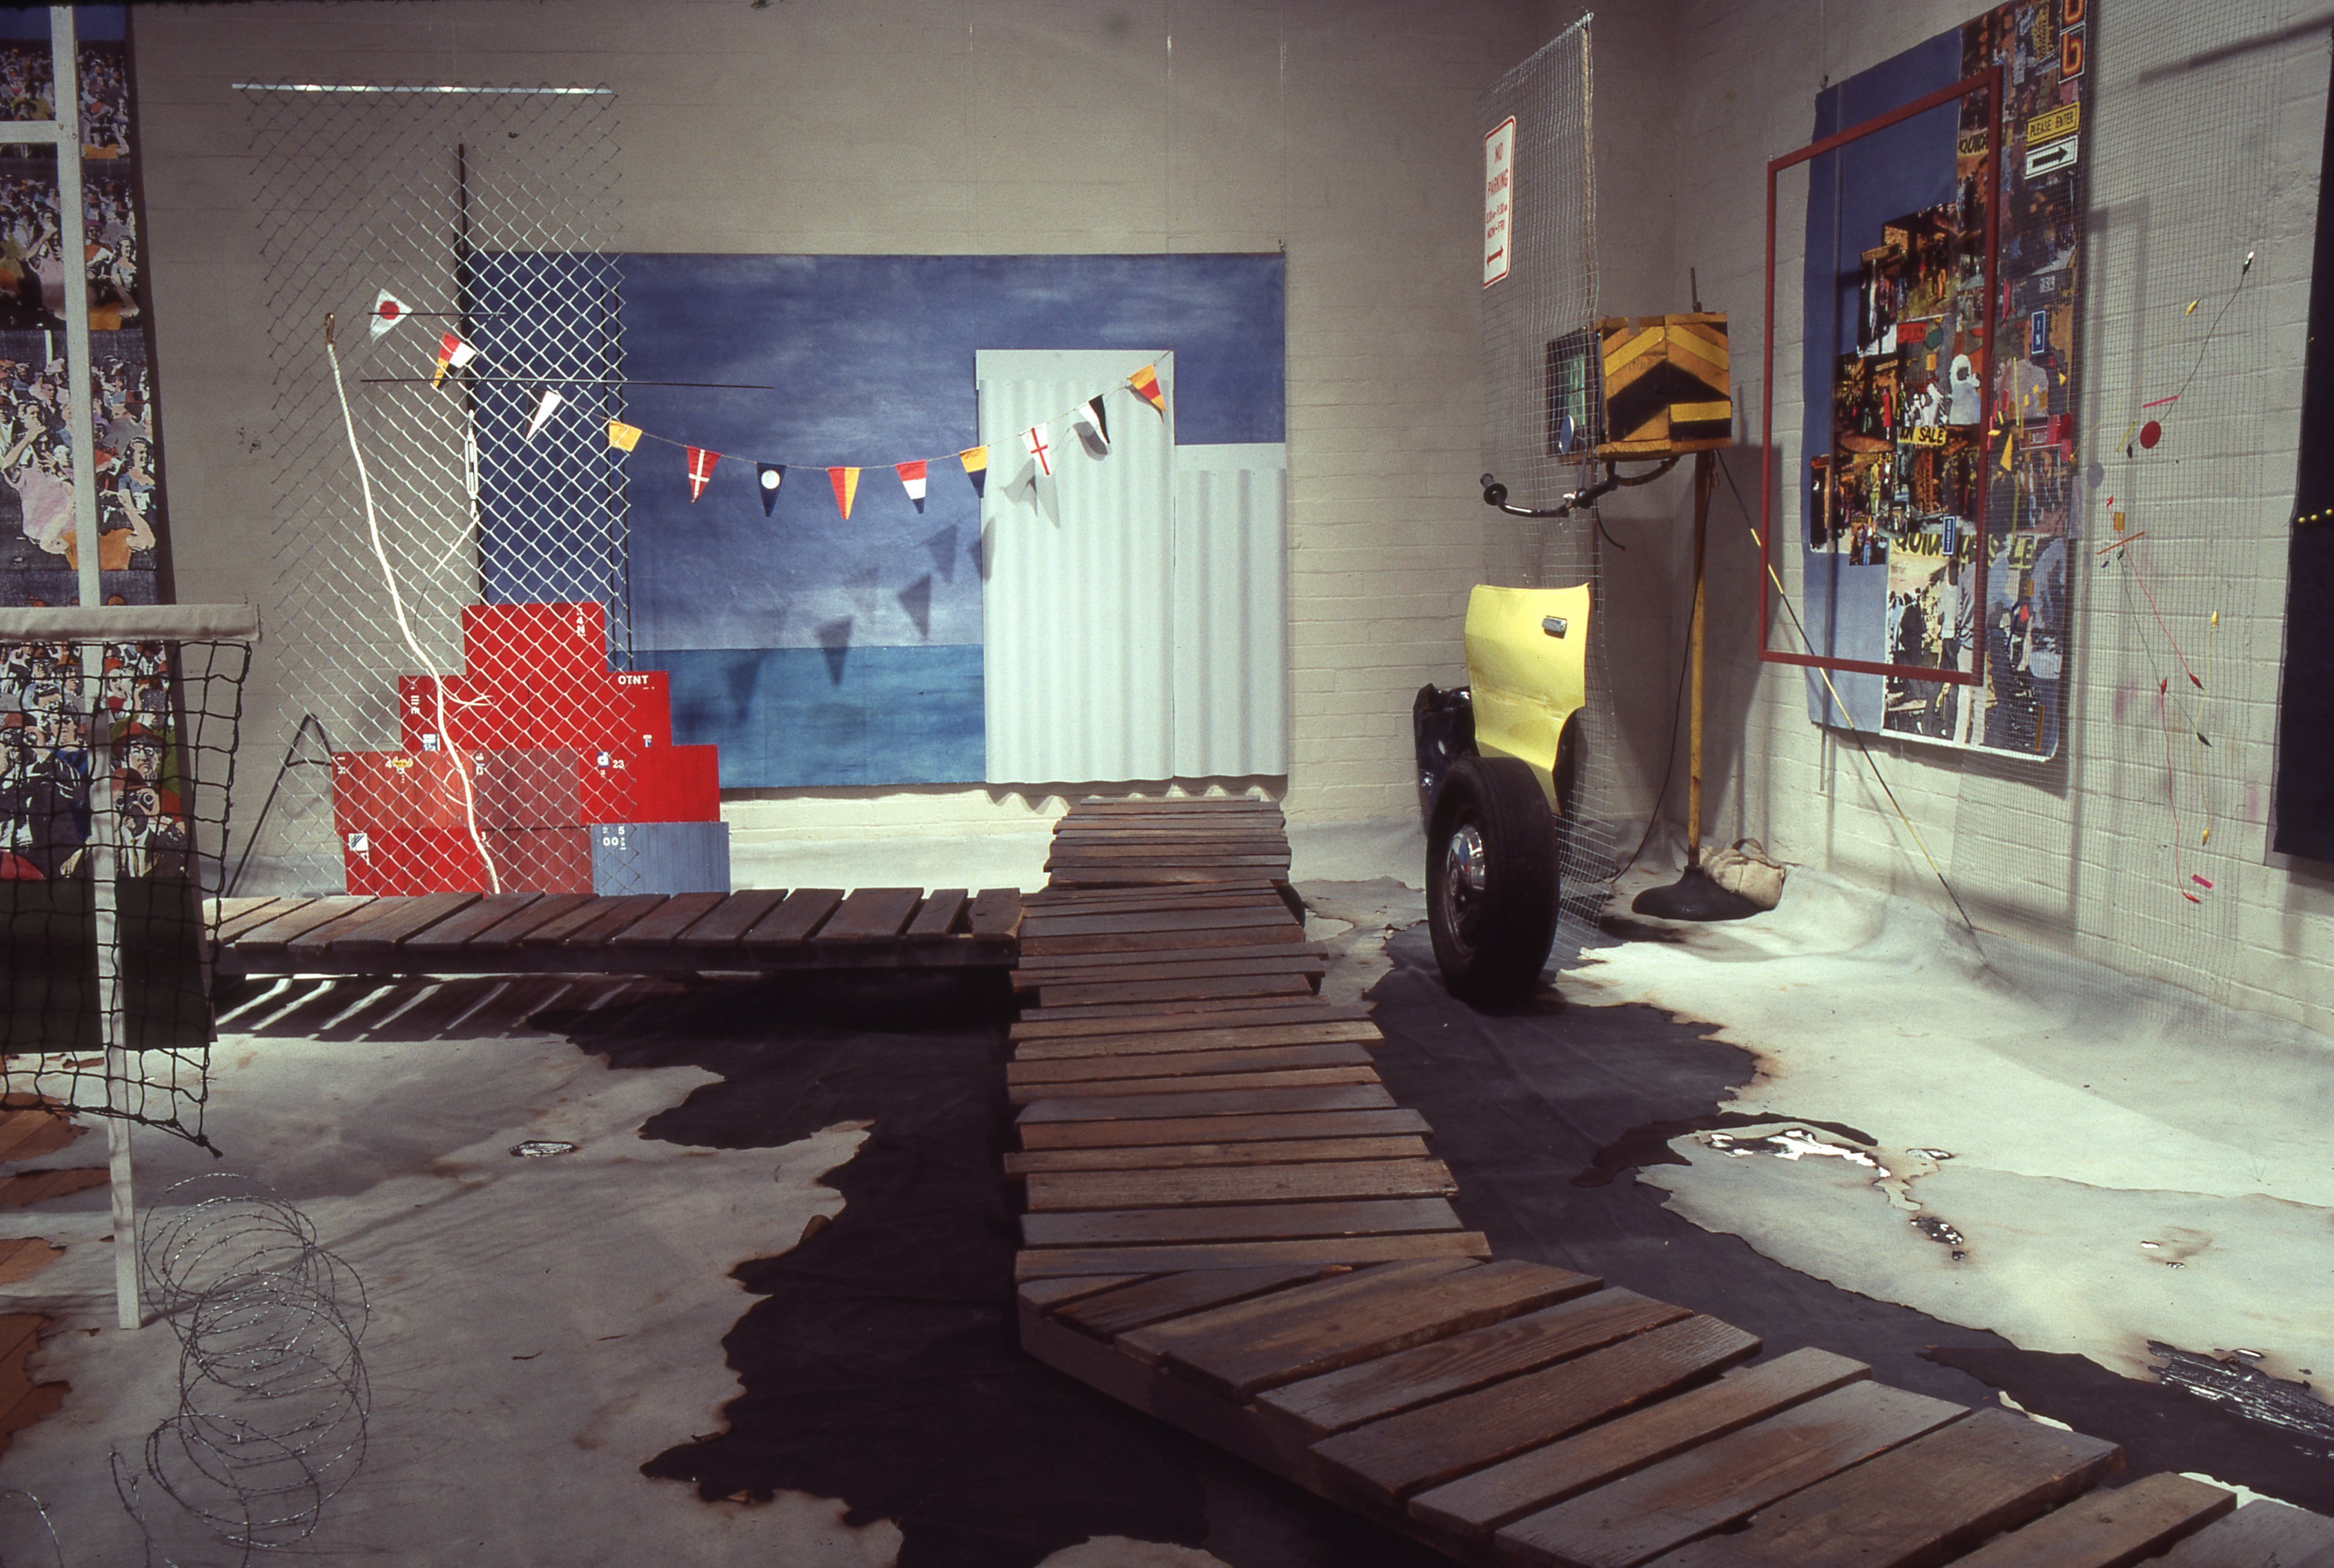 idg_archive_1985_peace_and_nuclear_war_in_the_australian_landscape_001_install.jpg